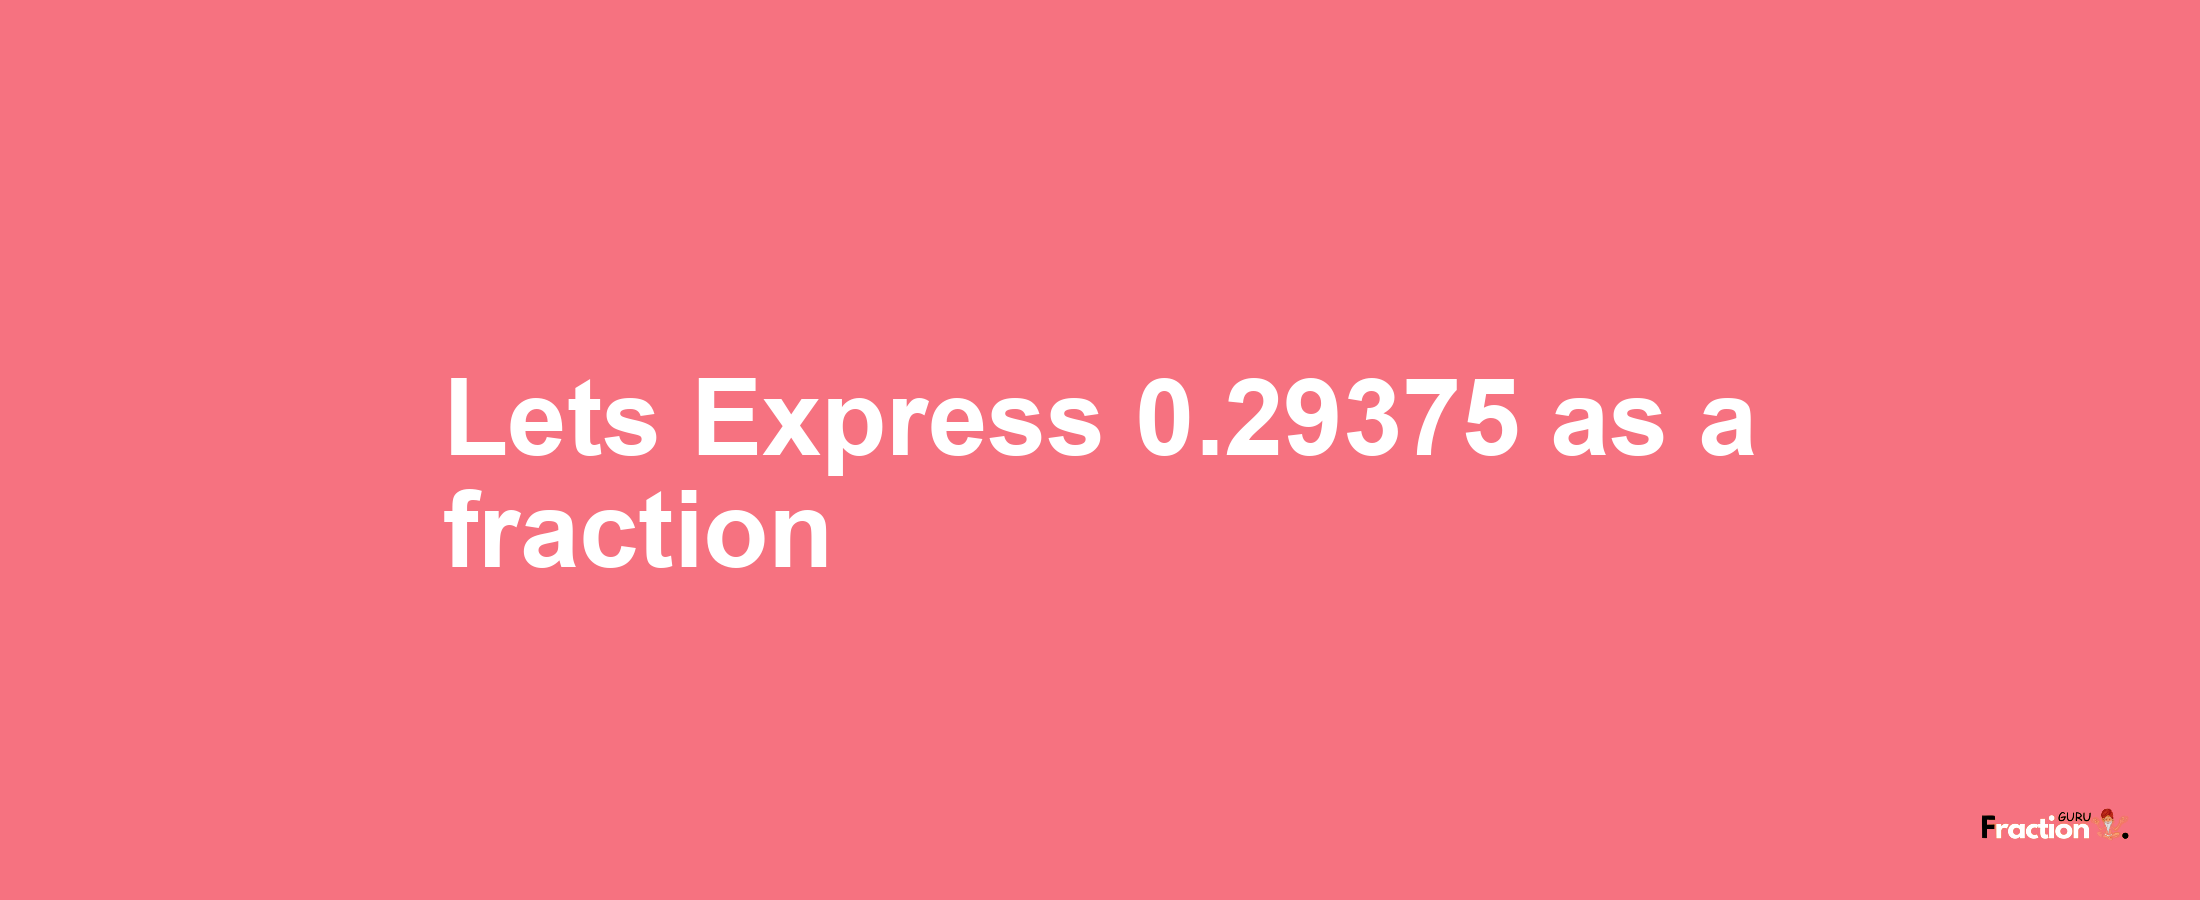 Lets Express 0.29375 as afraction